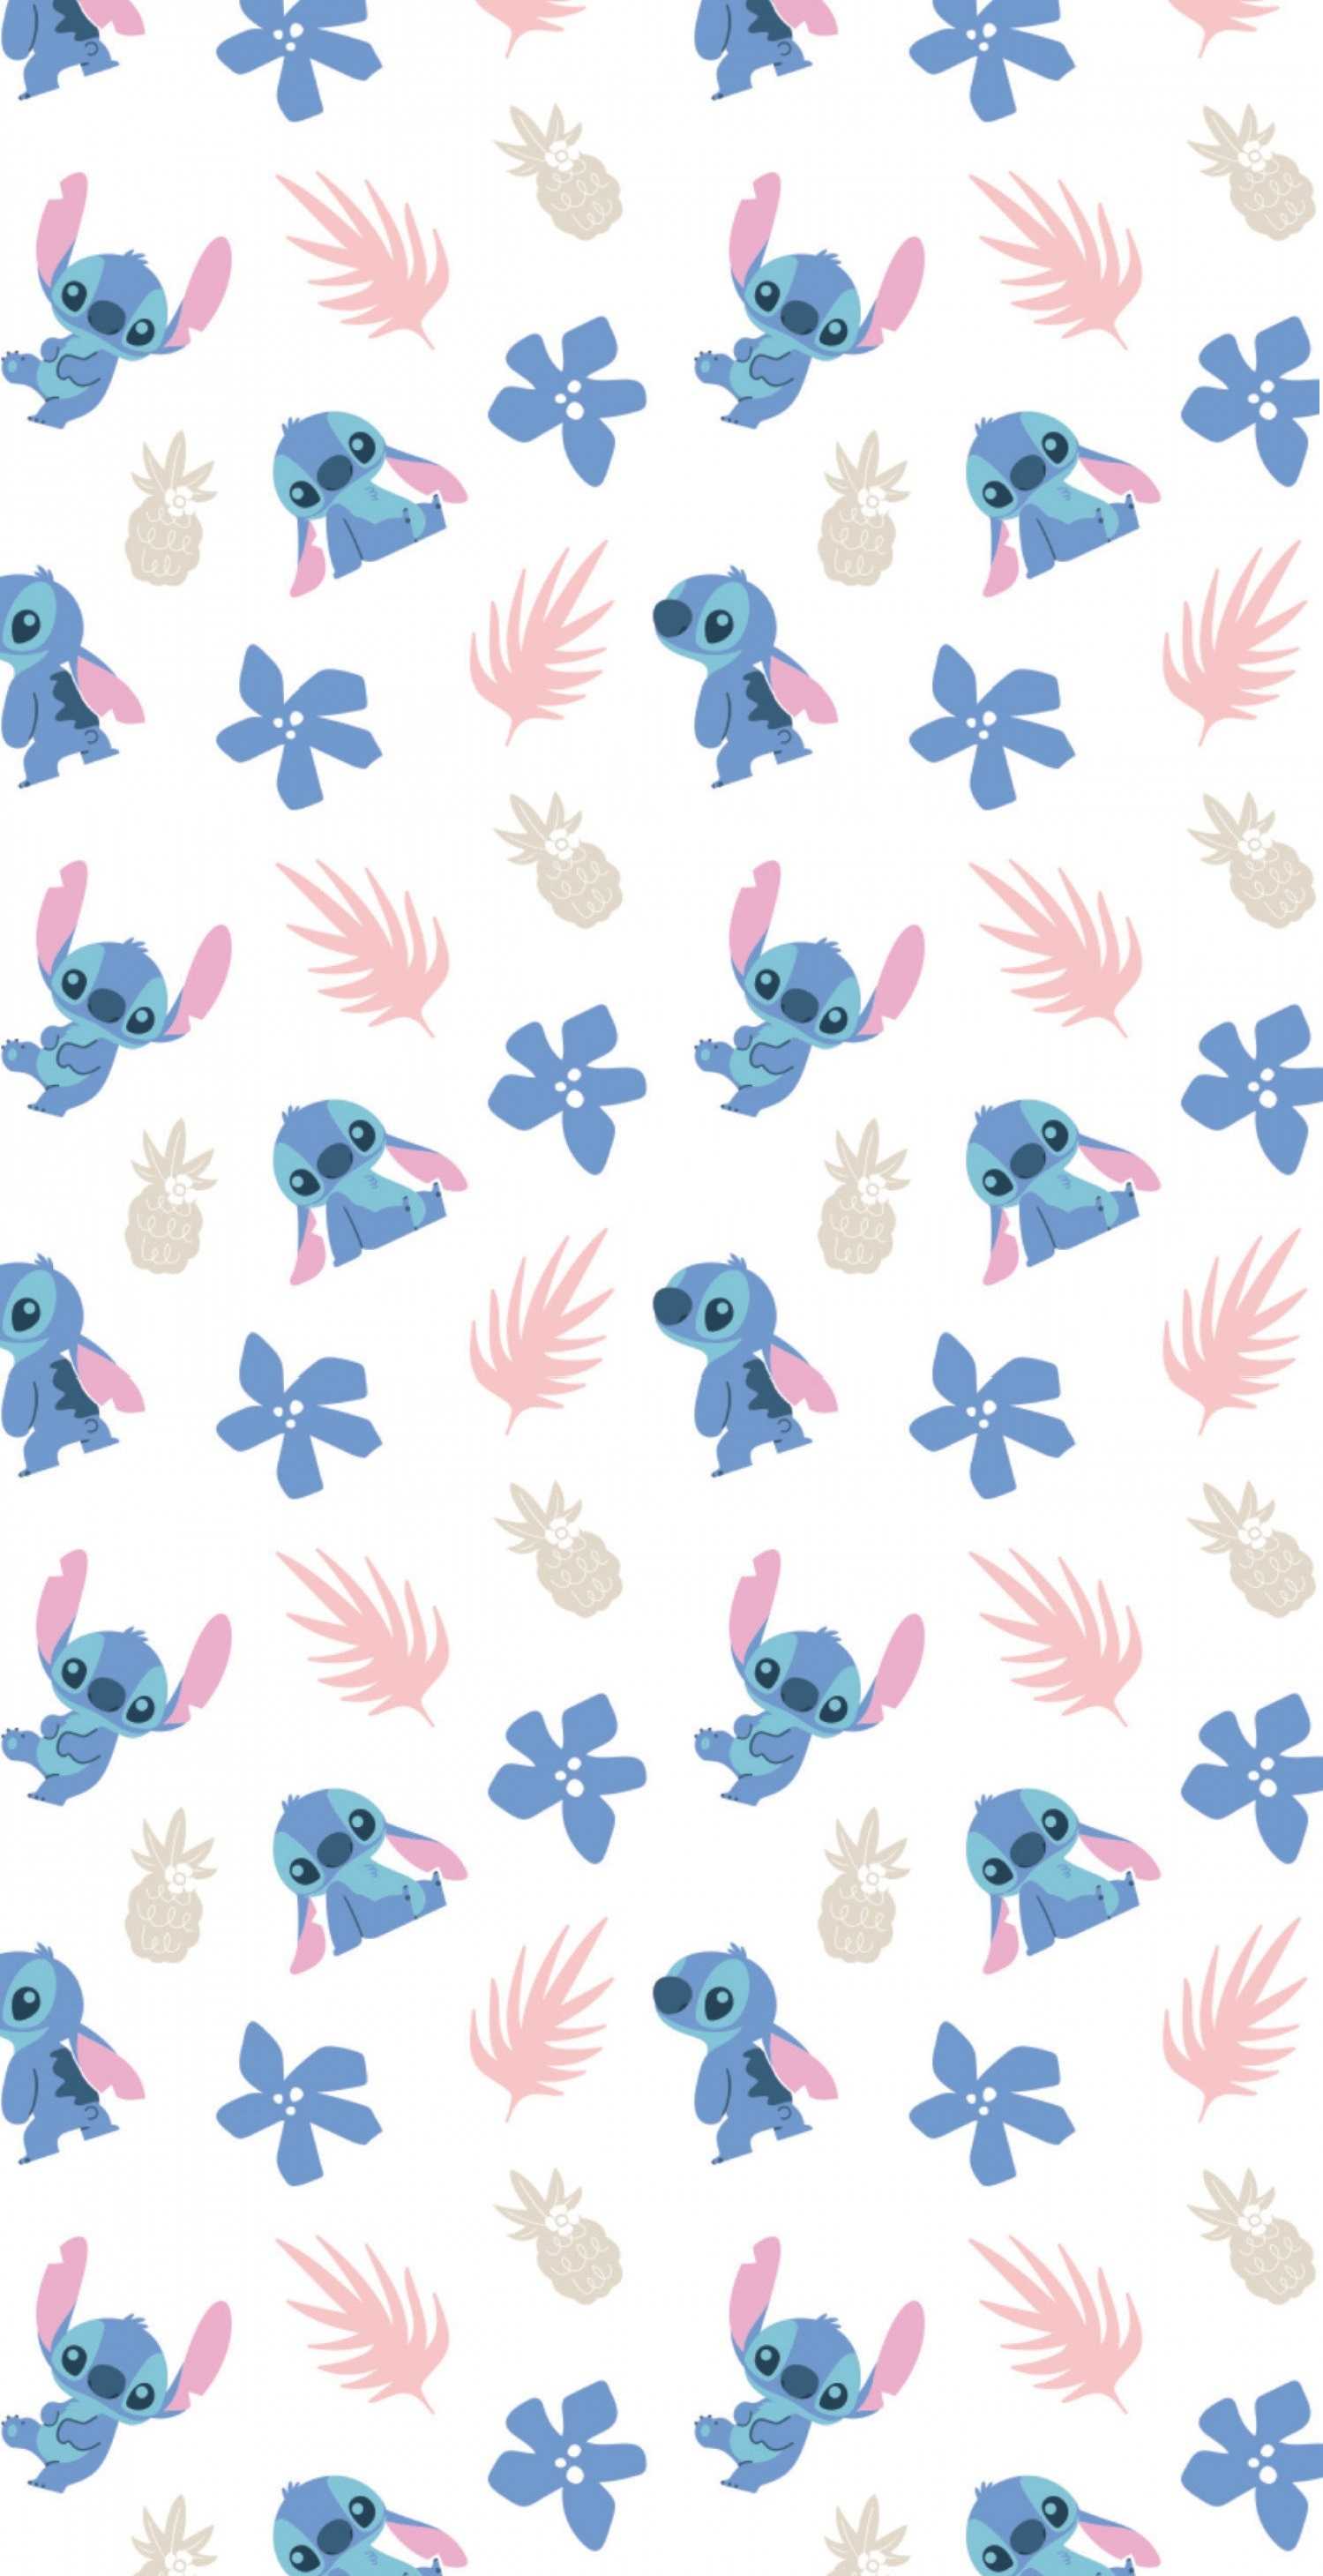 200+] Cute Stitch Wallpapers